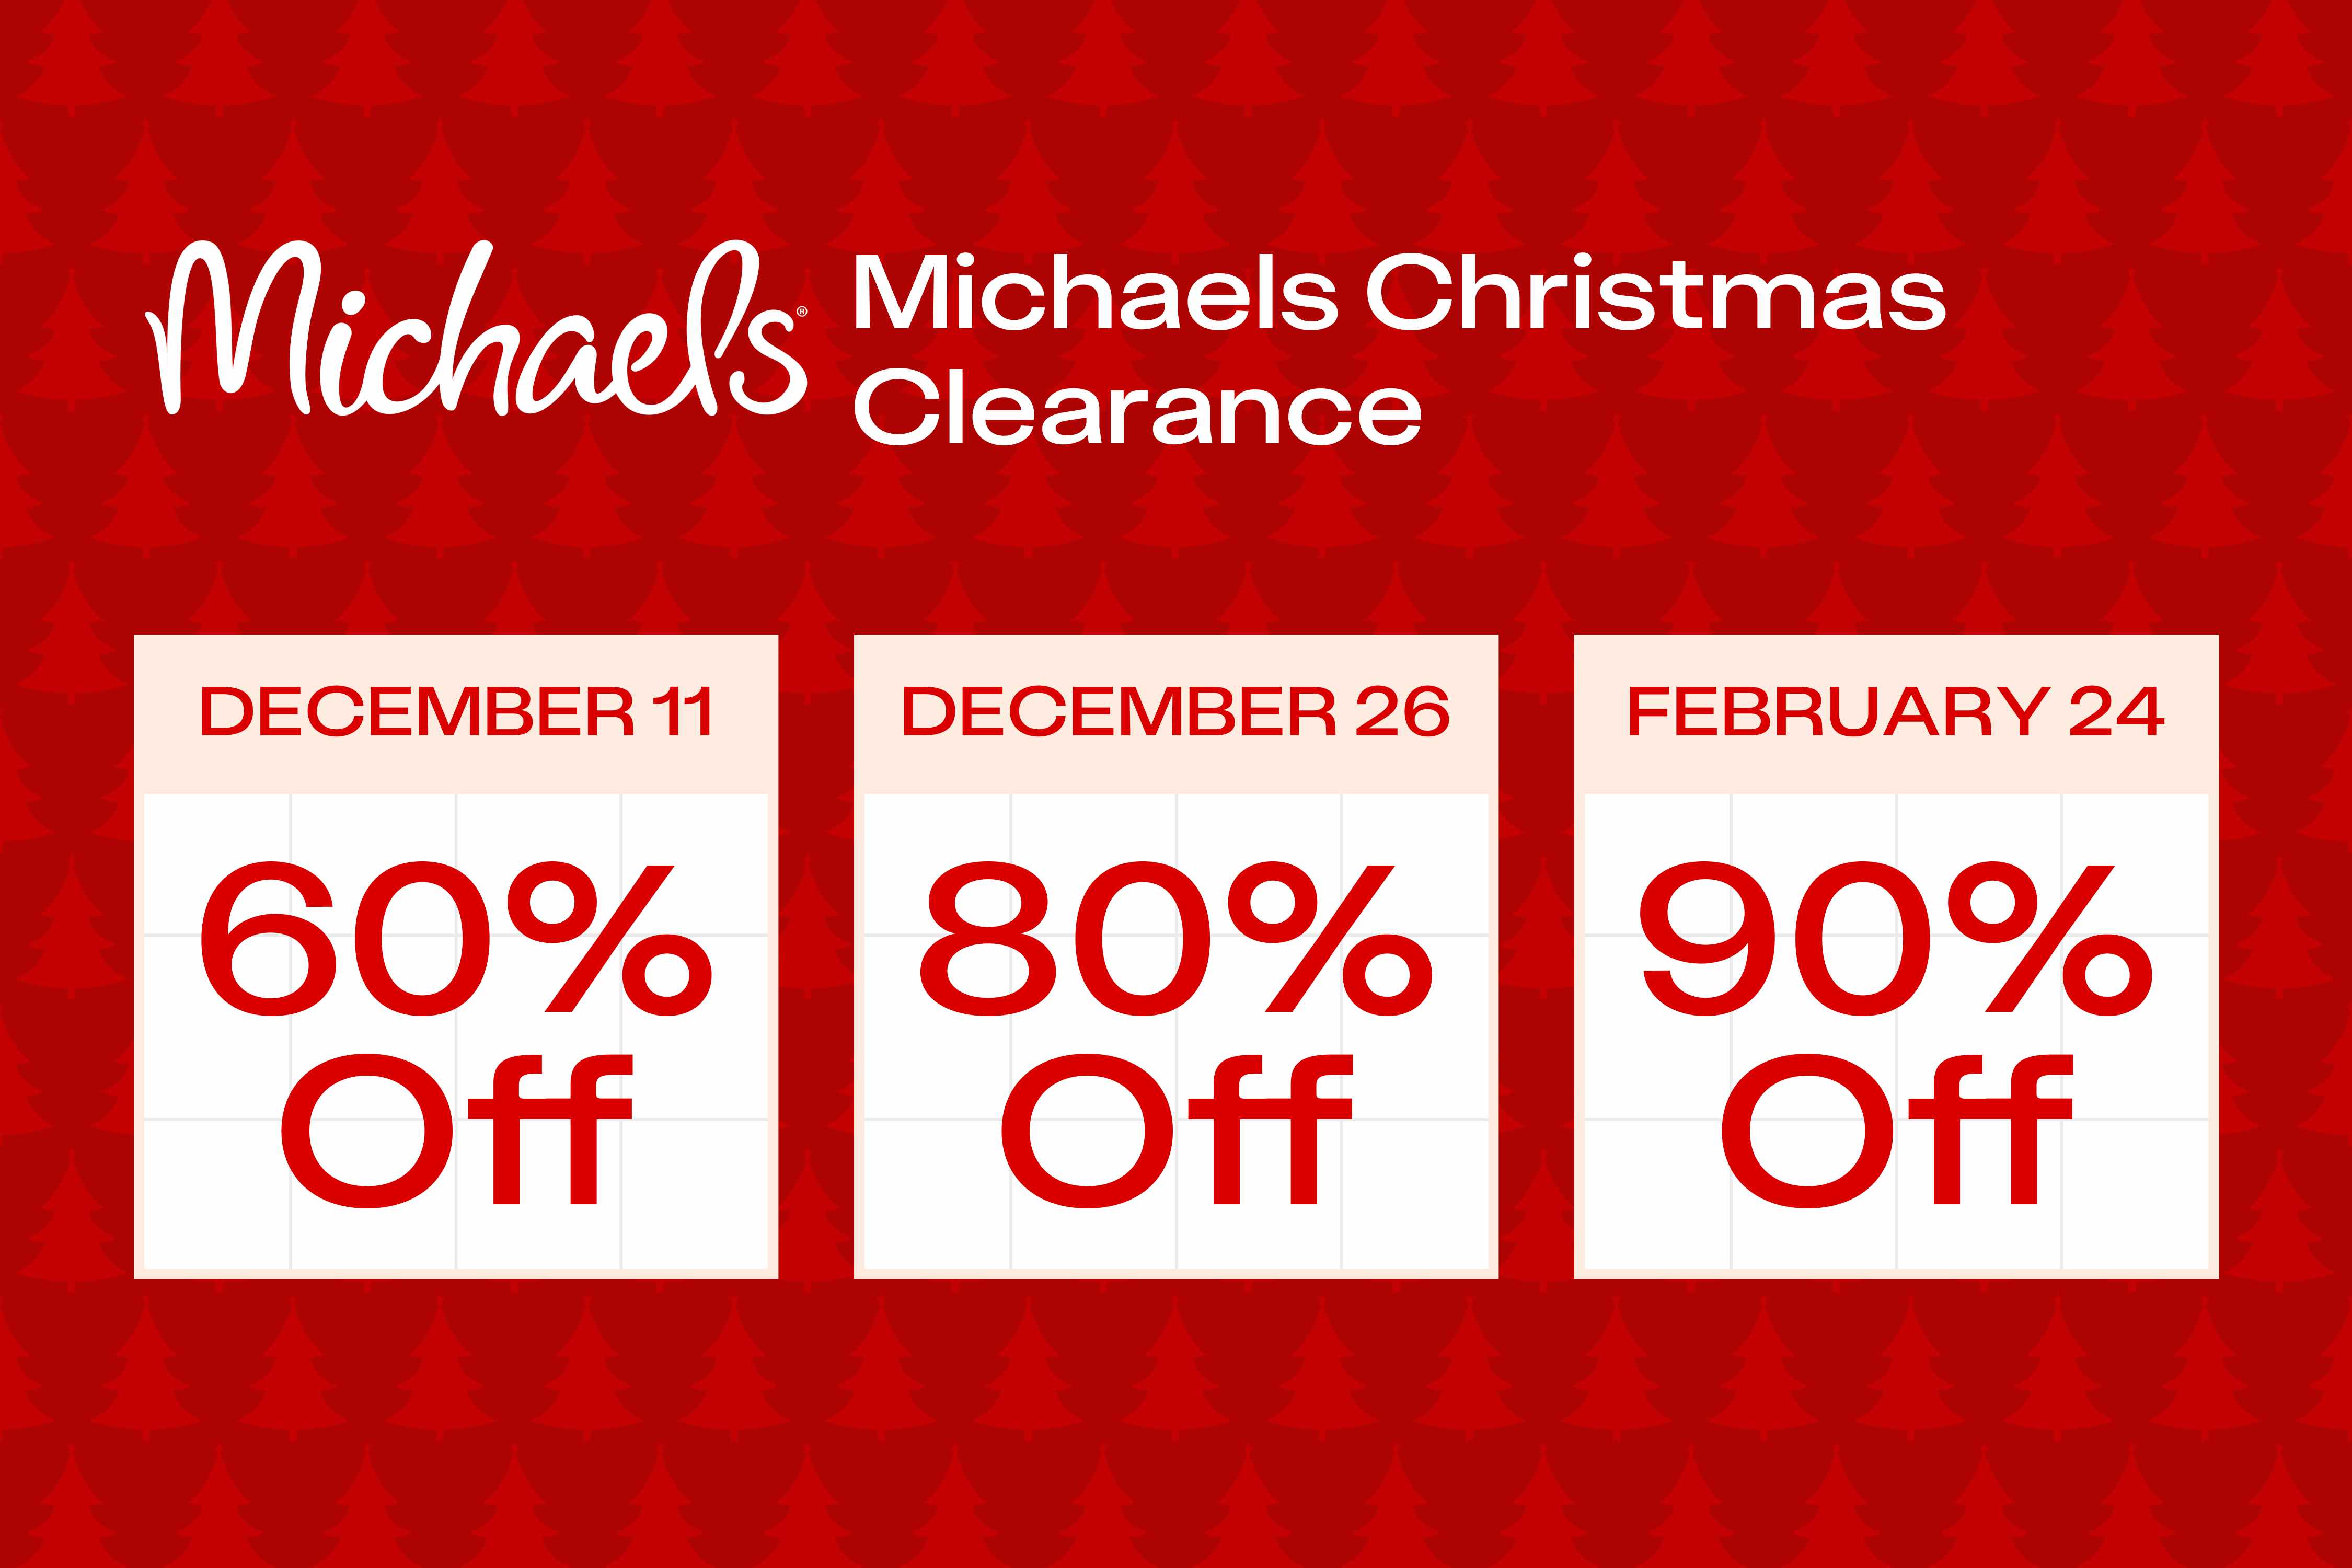 https://prod-cdn-thekrazycouponlady.imgix.net/wp-content/uploads/2023/12/michaels-christmas-clearance-1703014657-1703014657.png?auto=format&fit=fill&q=25